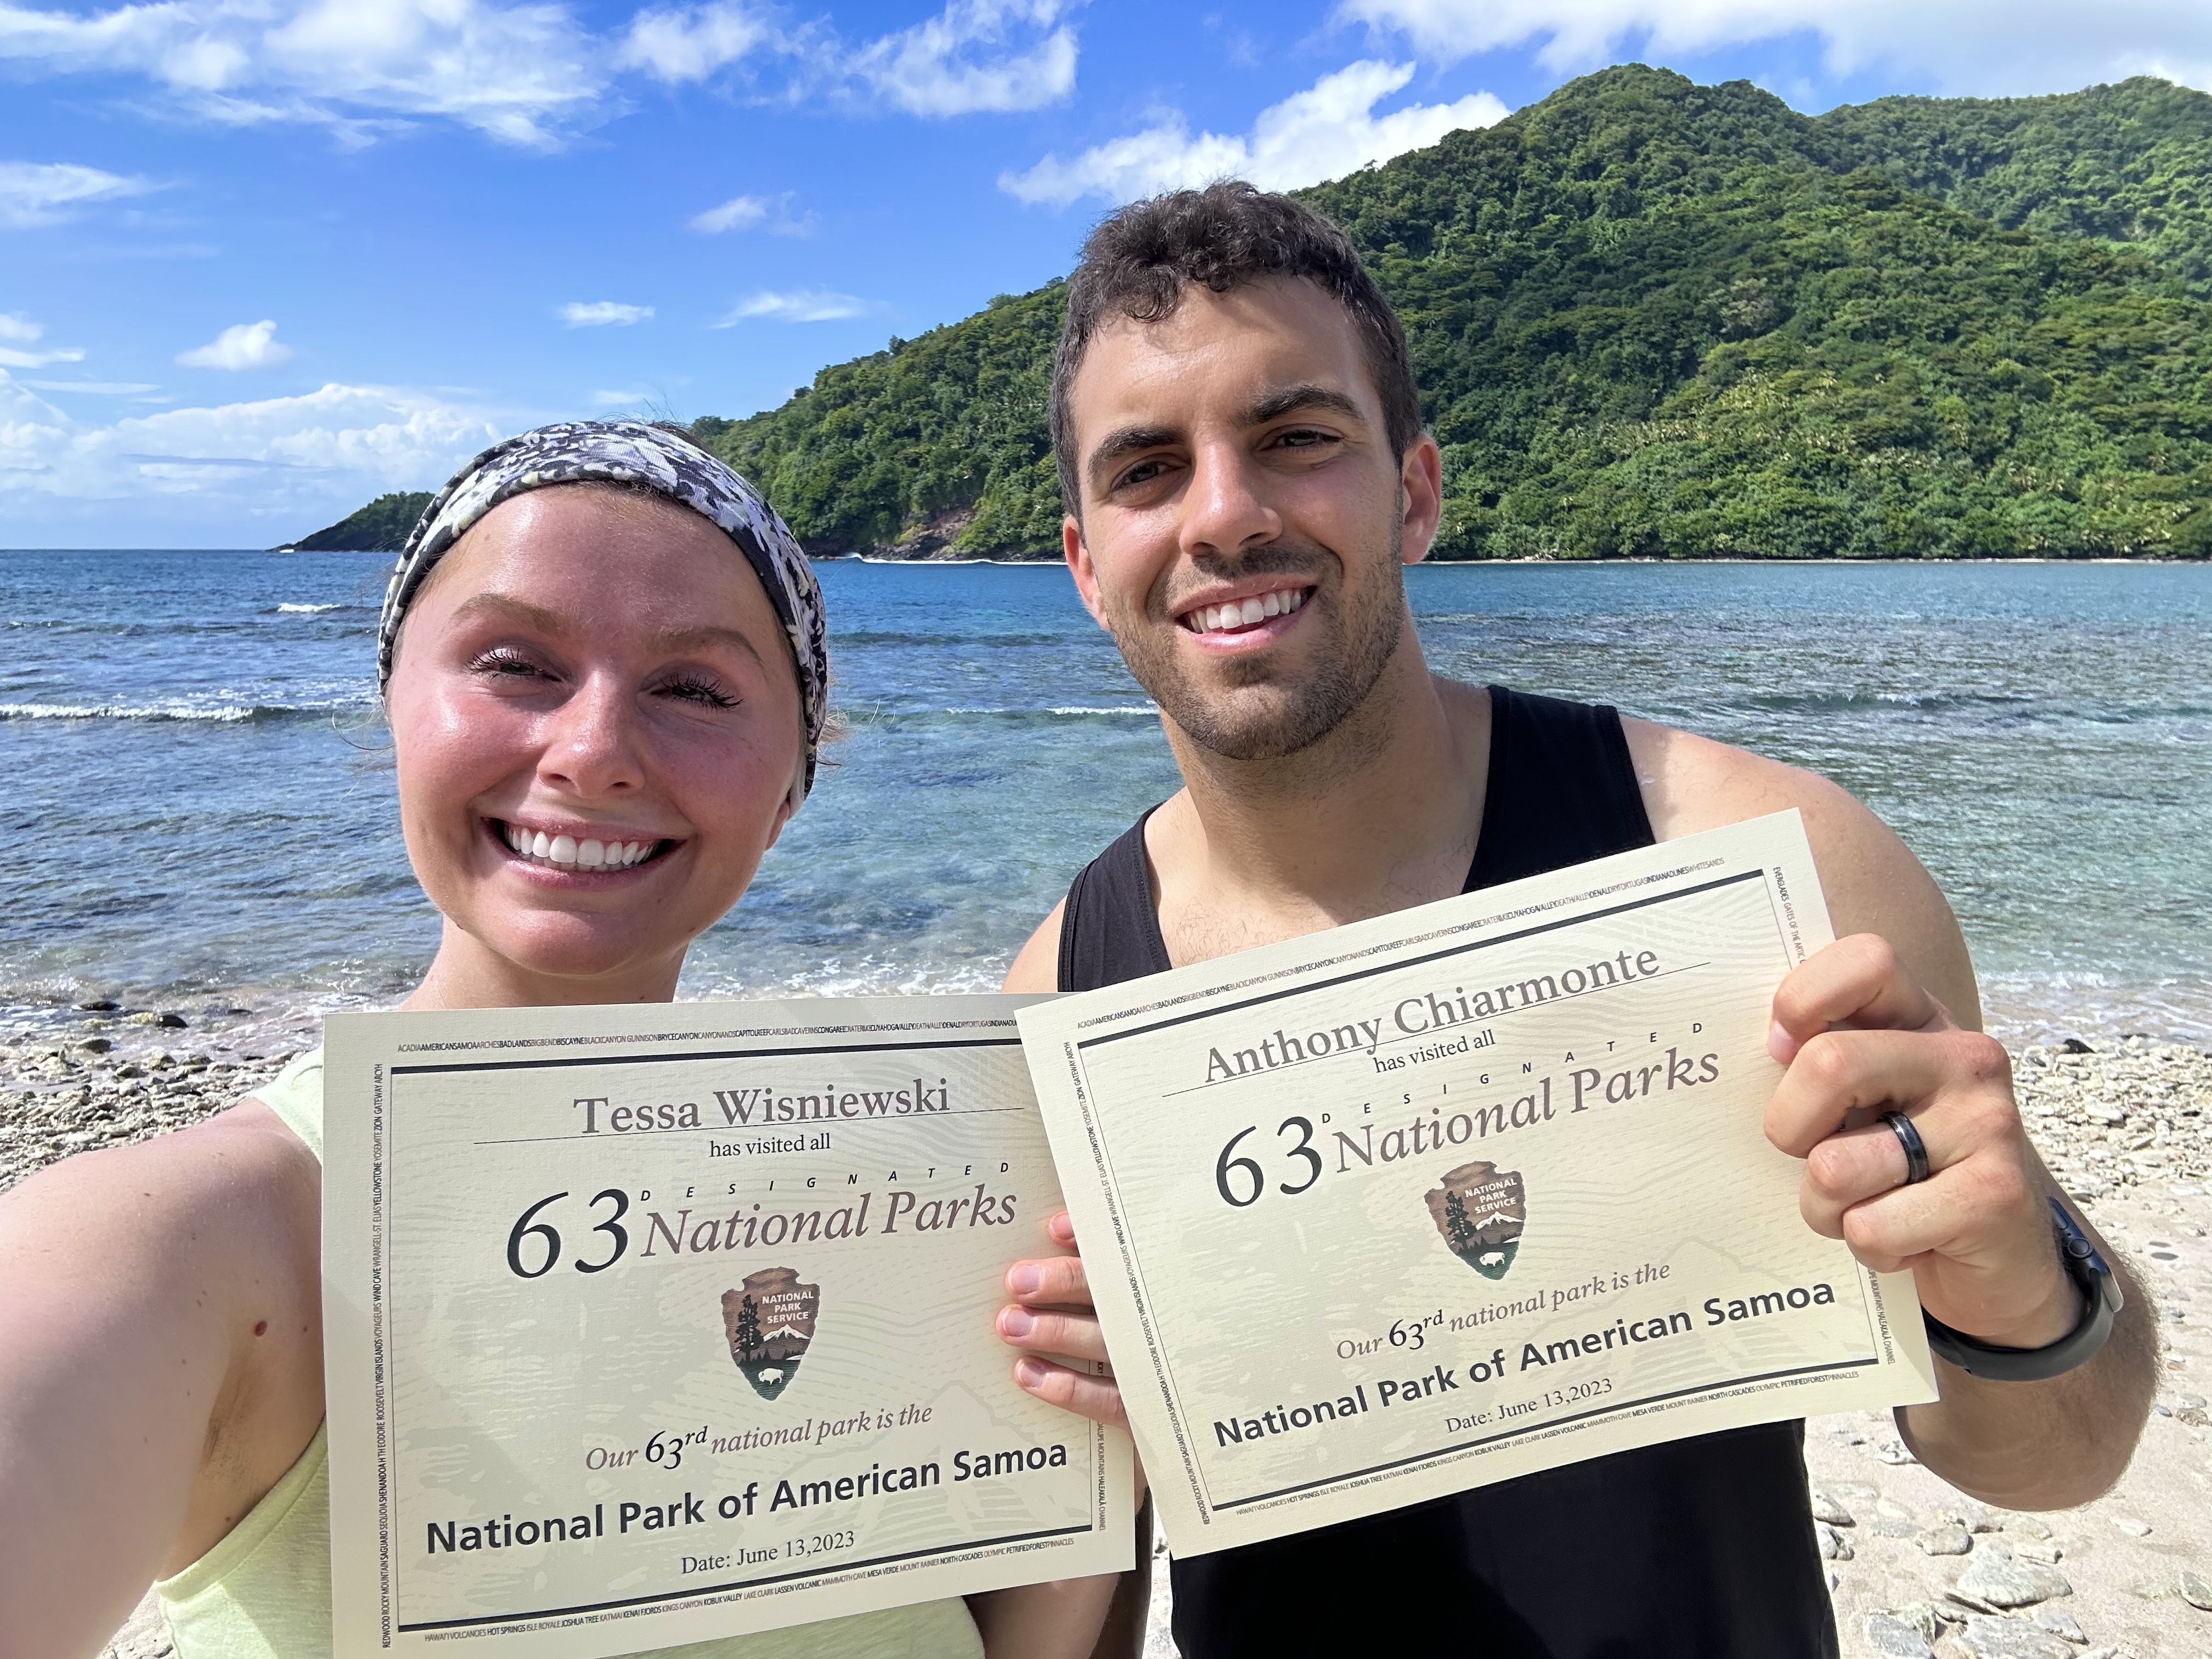 Tessa Wisniewski‘17, ‘19 and her husband holding up certificates that say 63 National Parks